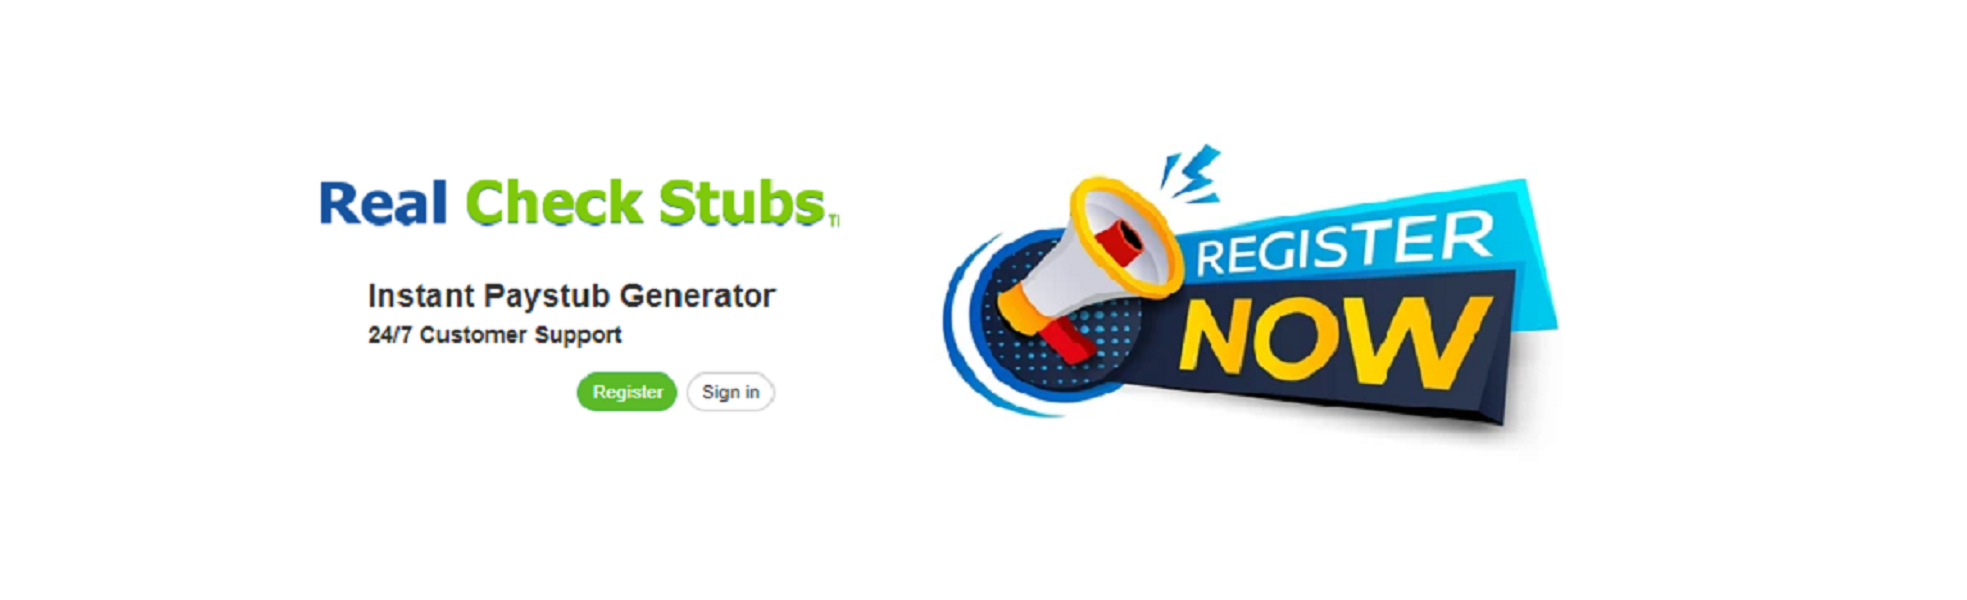 Get Your Online Pay Stubs Today From Real Check Stubs Generator